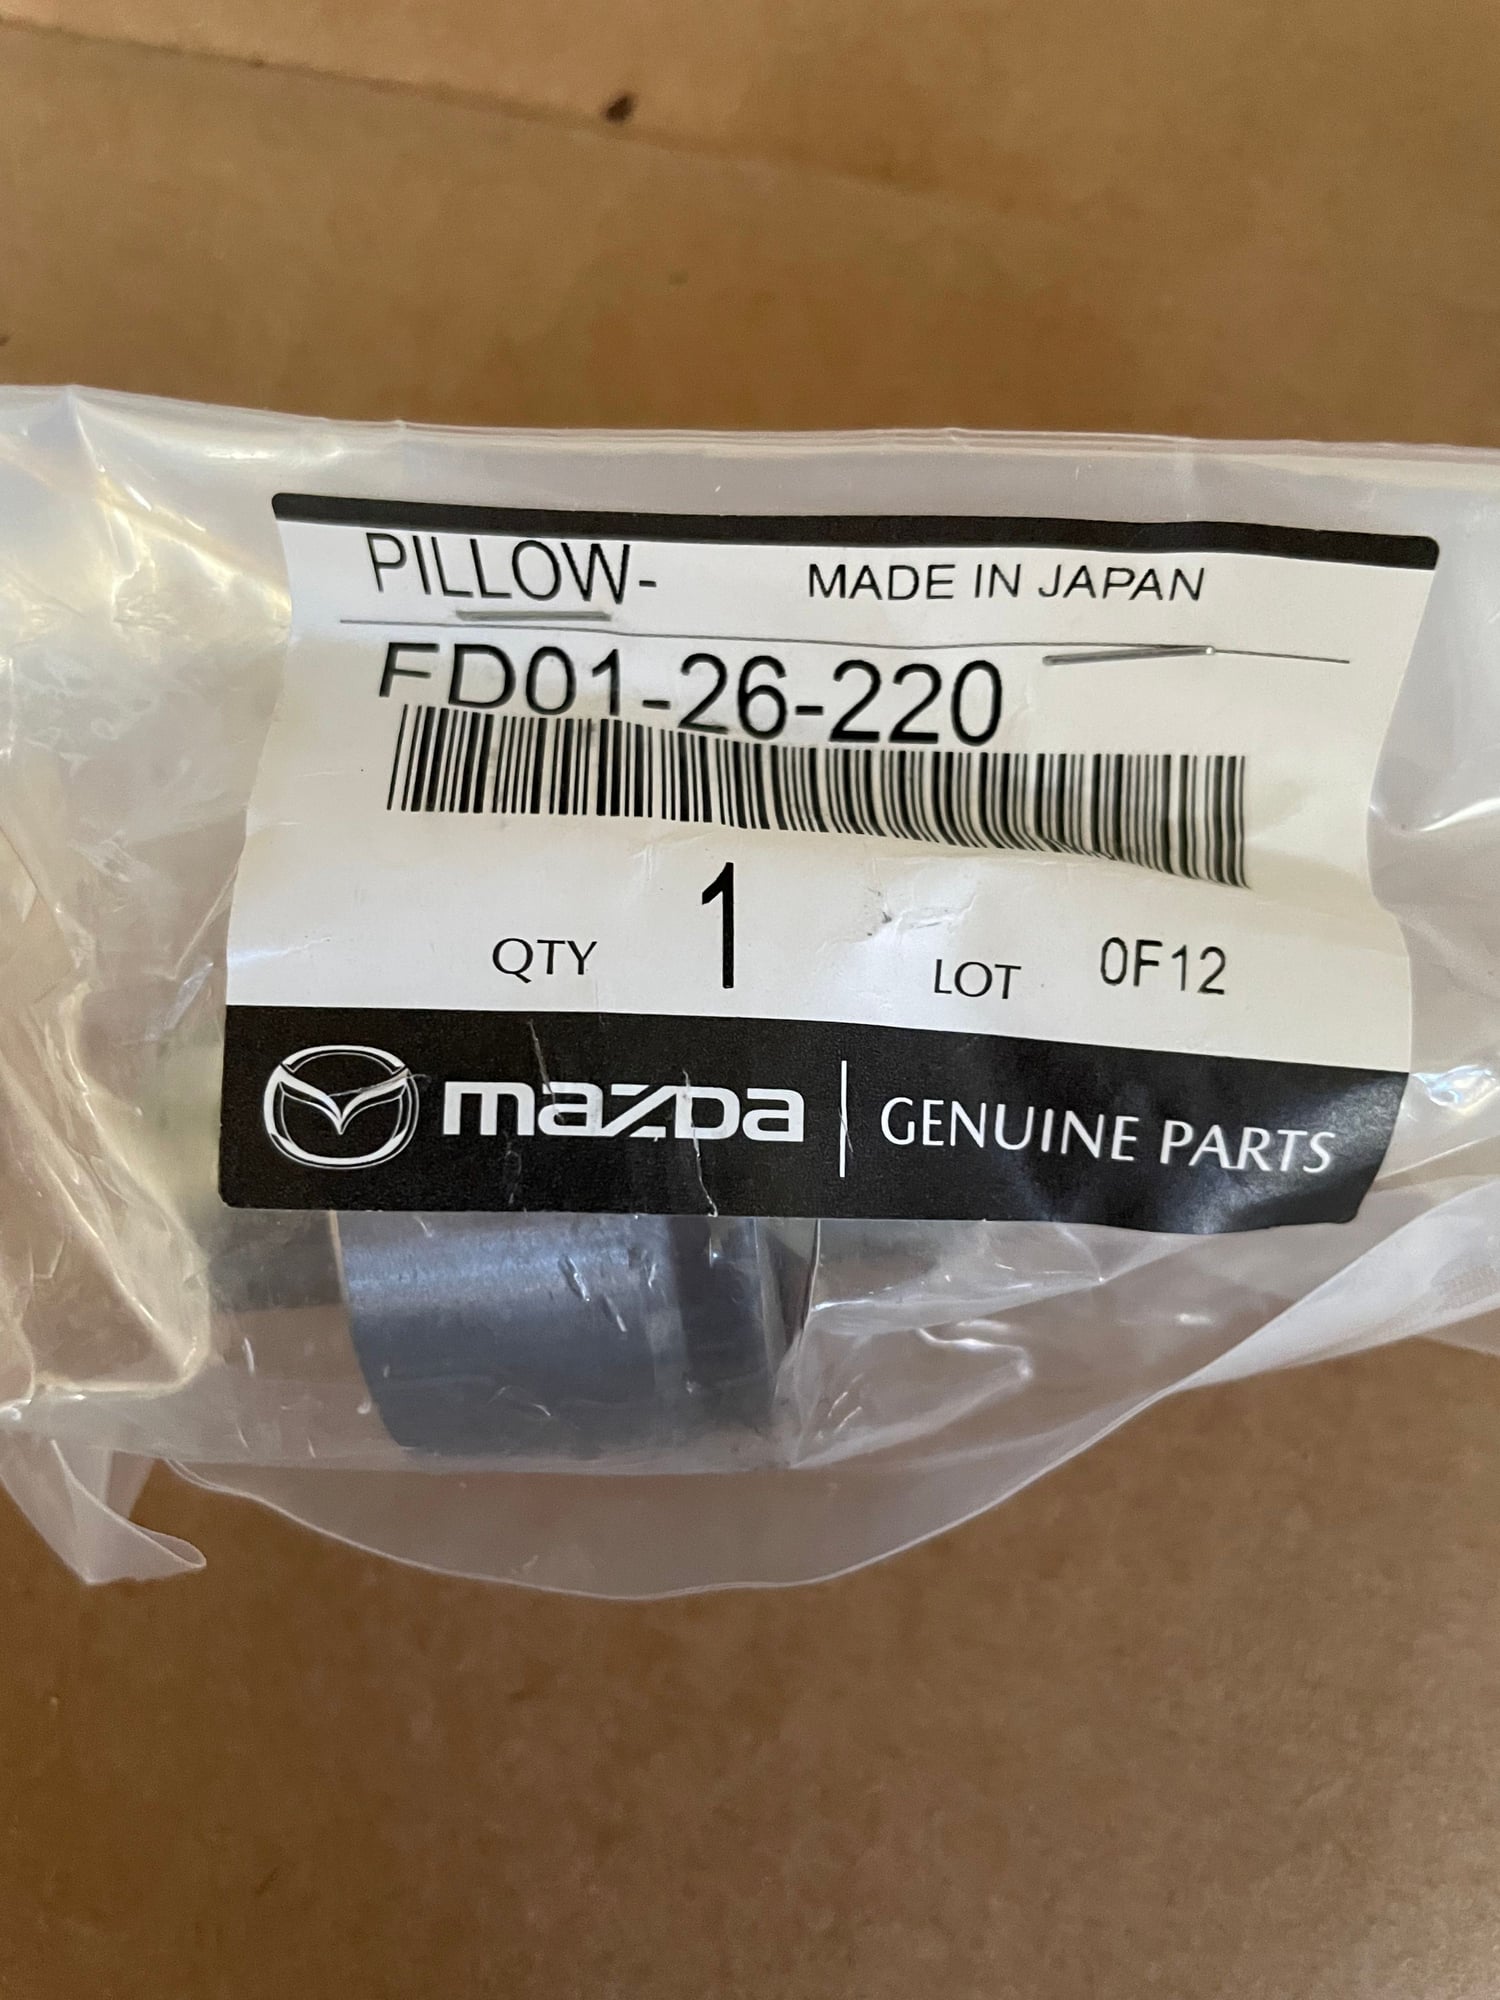 Steering/Suspension - OEM Pillow Ball Bushings - New - 1993 to 2002 Mazda RX-7 - N. Scituate, RI 02857, United States